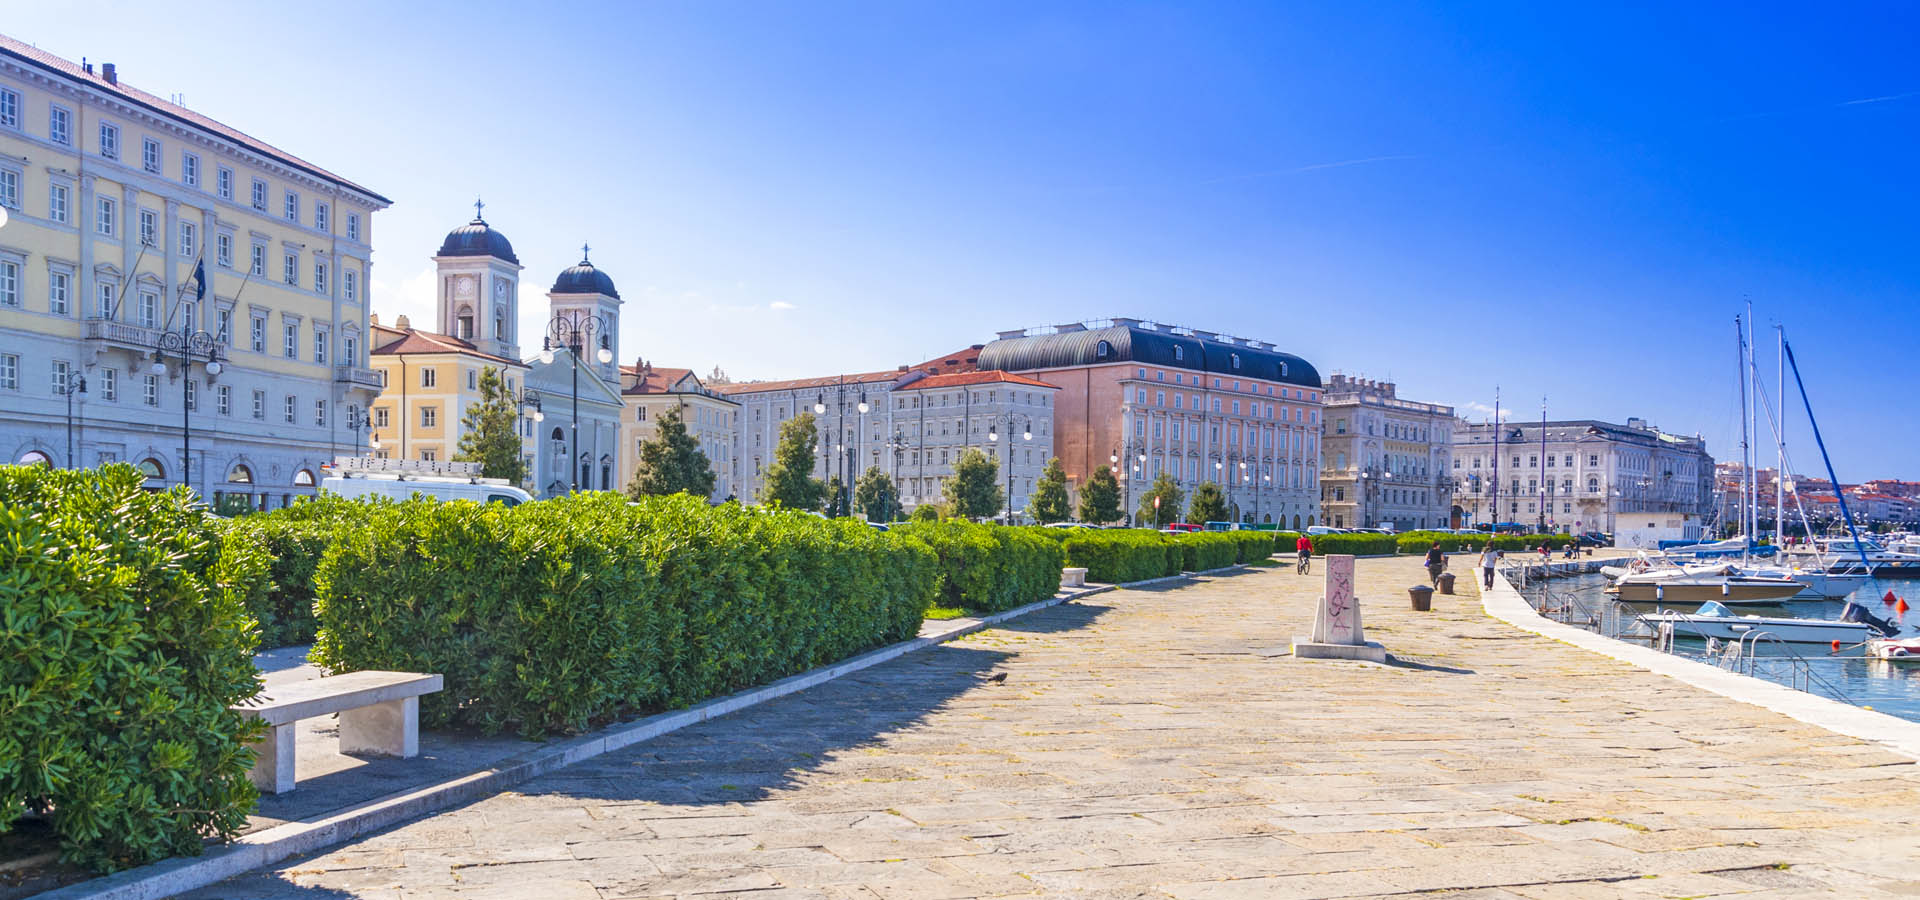 Ruled by many nations, Trieste, Italy, boasts an international flavor